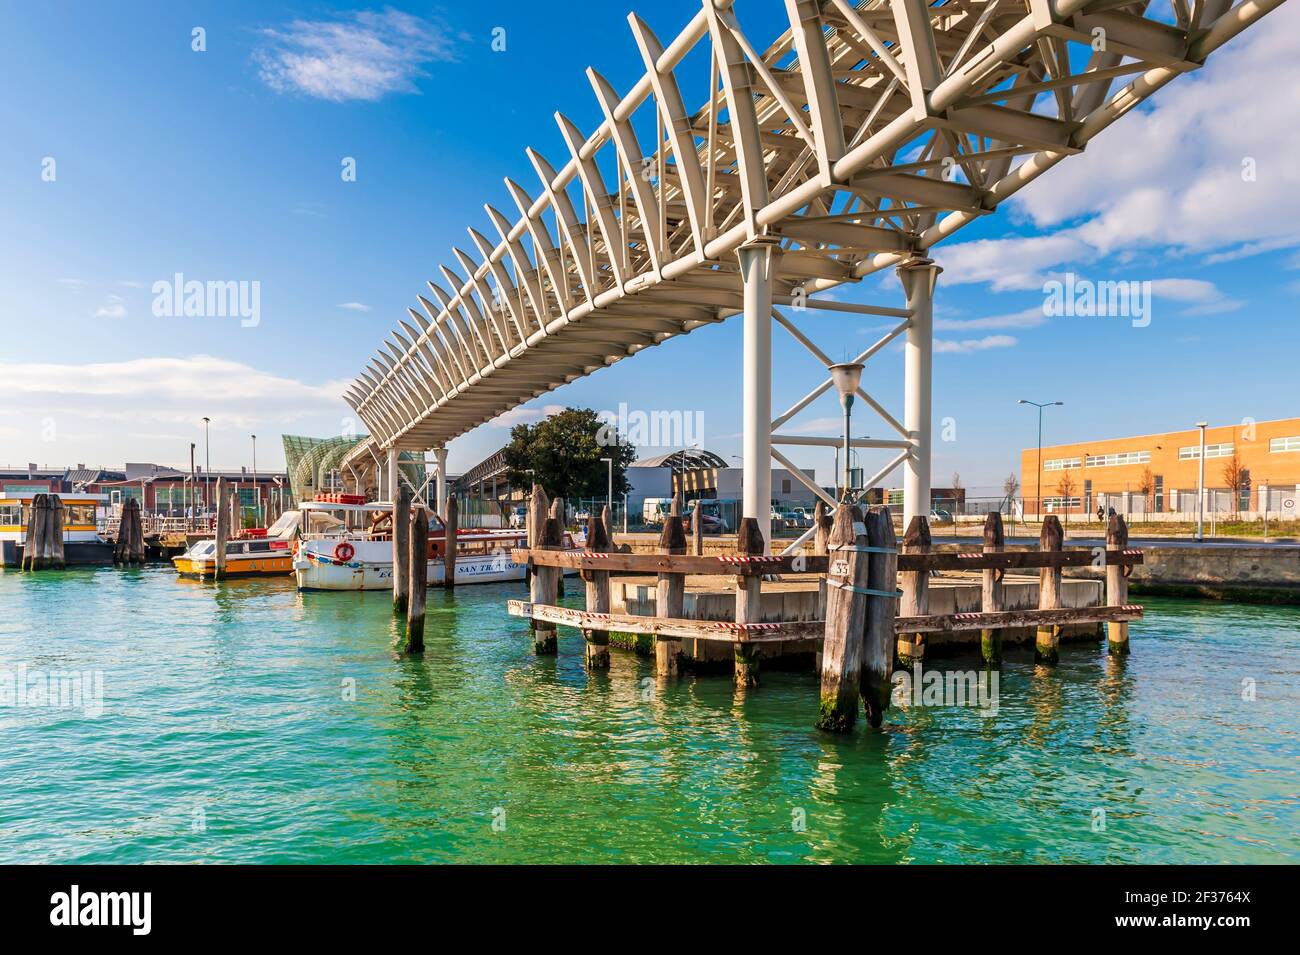 Monorail between Piazzale Roma and the cruise port of Venice in Veneto, Italy Stock Photo